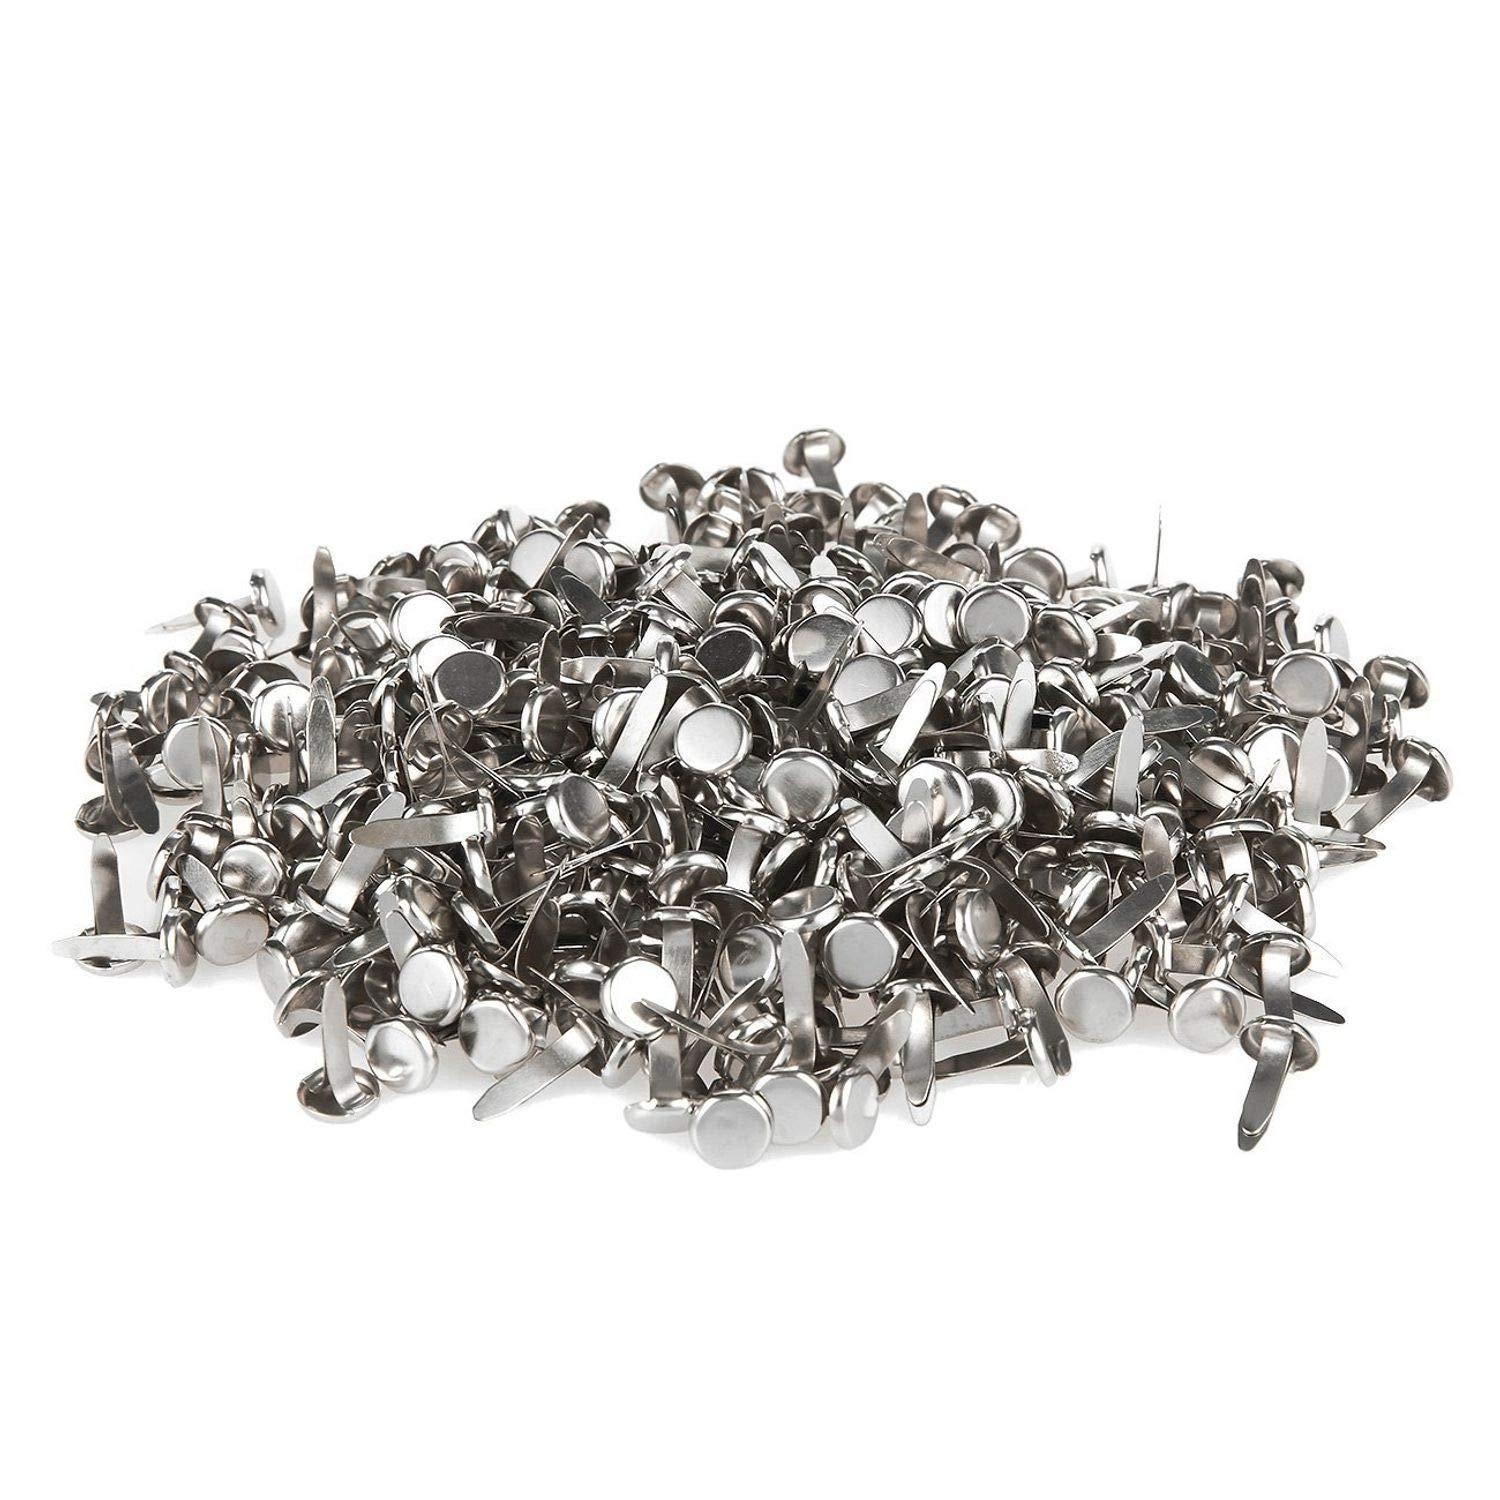 500 Pcs Paper Fasteners baotongle Brass Plated Scrapbooking Brads Round Metal Brads with Storage Bag for Crafts Making DIY Gold and Silver